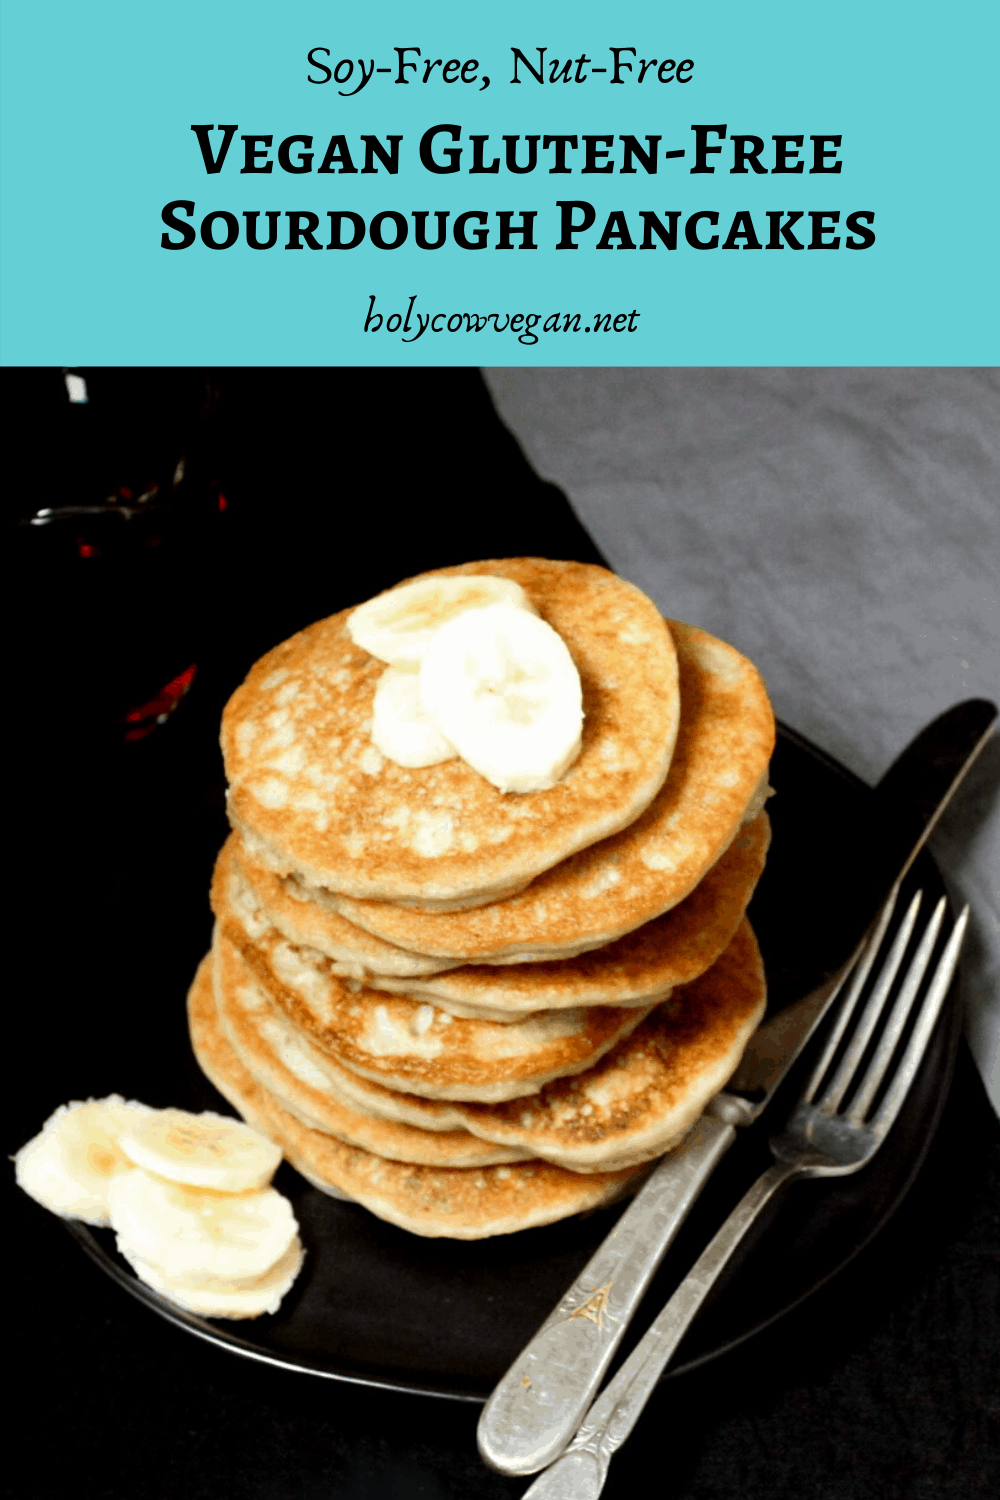 Vegan Gluten-Free Sourdough Pancakes are healthy and they work for nearly every diet!